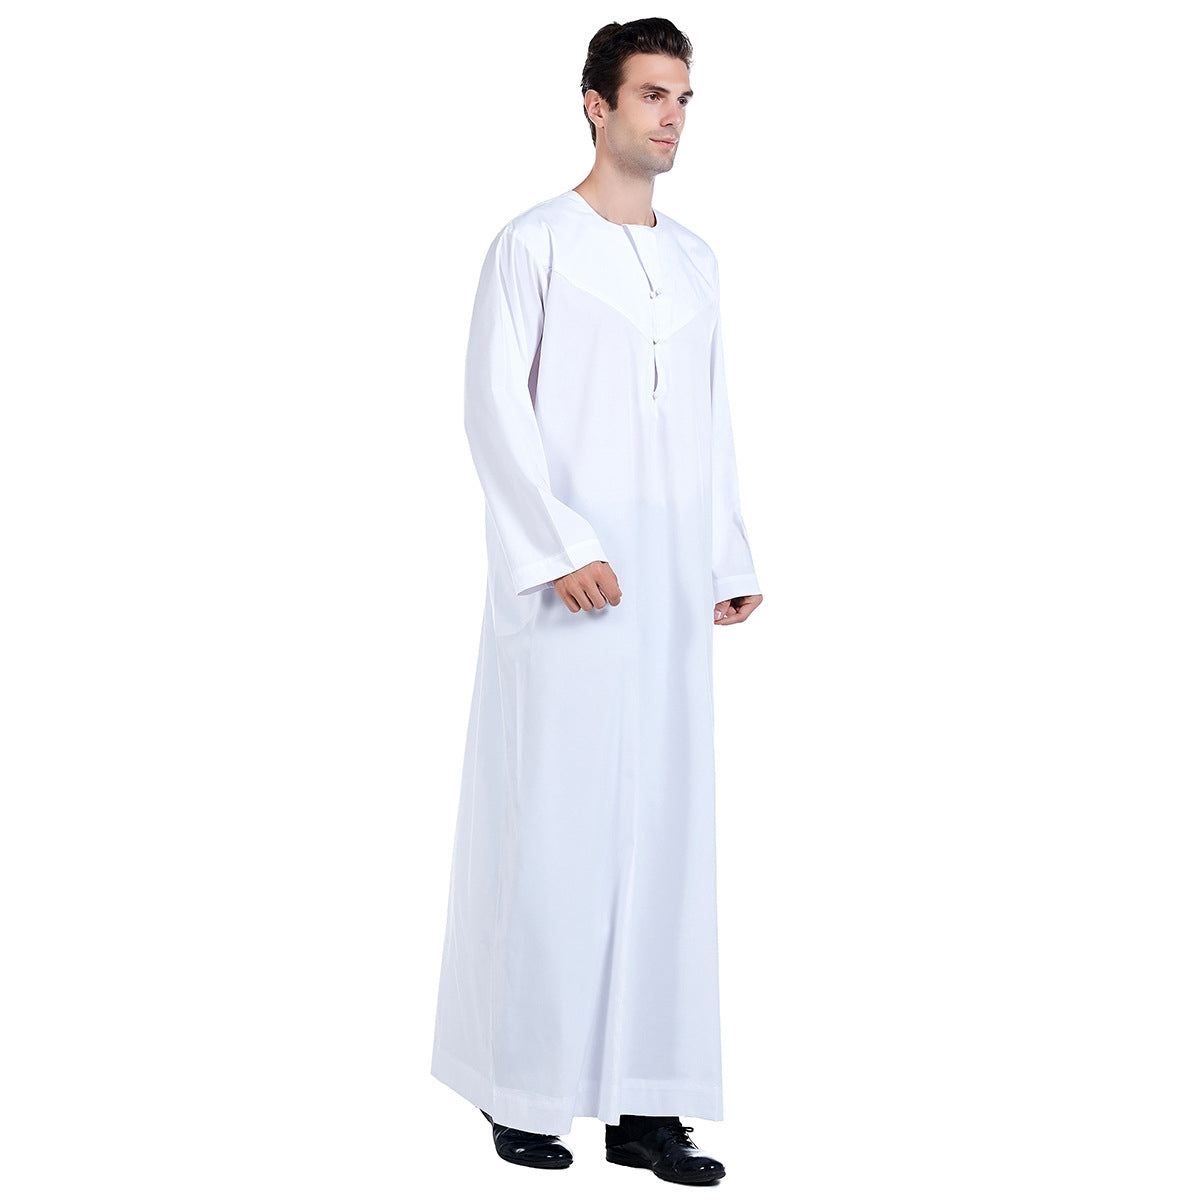 Explore our exclusive Omani Men's Thobe in White, available only at Hikmah Boutique. Discover a perfect blend of tradition and modernity with this classic Islamic garment. Made from premium linen and cotton, our men's thobe offers unparalleled comfort. Ideal for weddings and special occasion. Shop at competitive price.